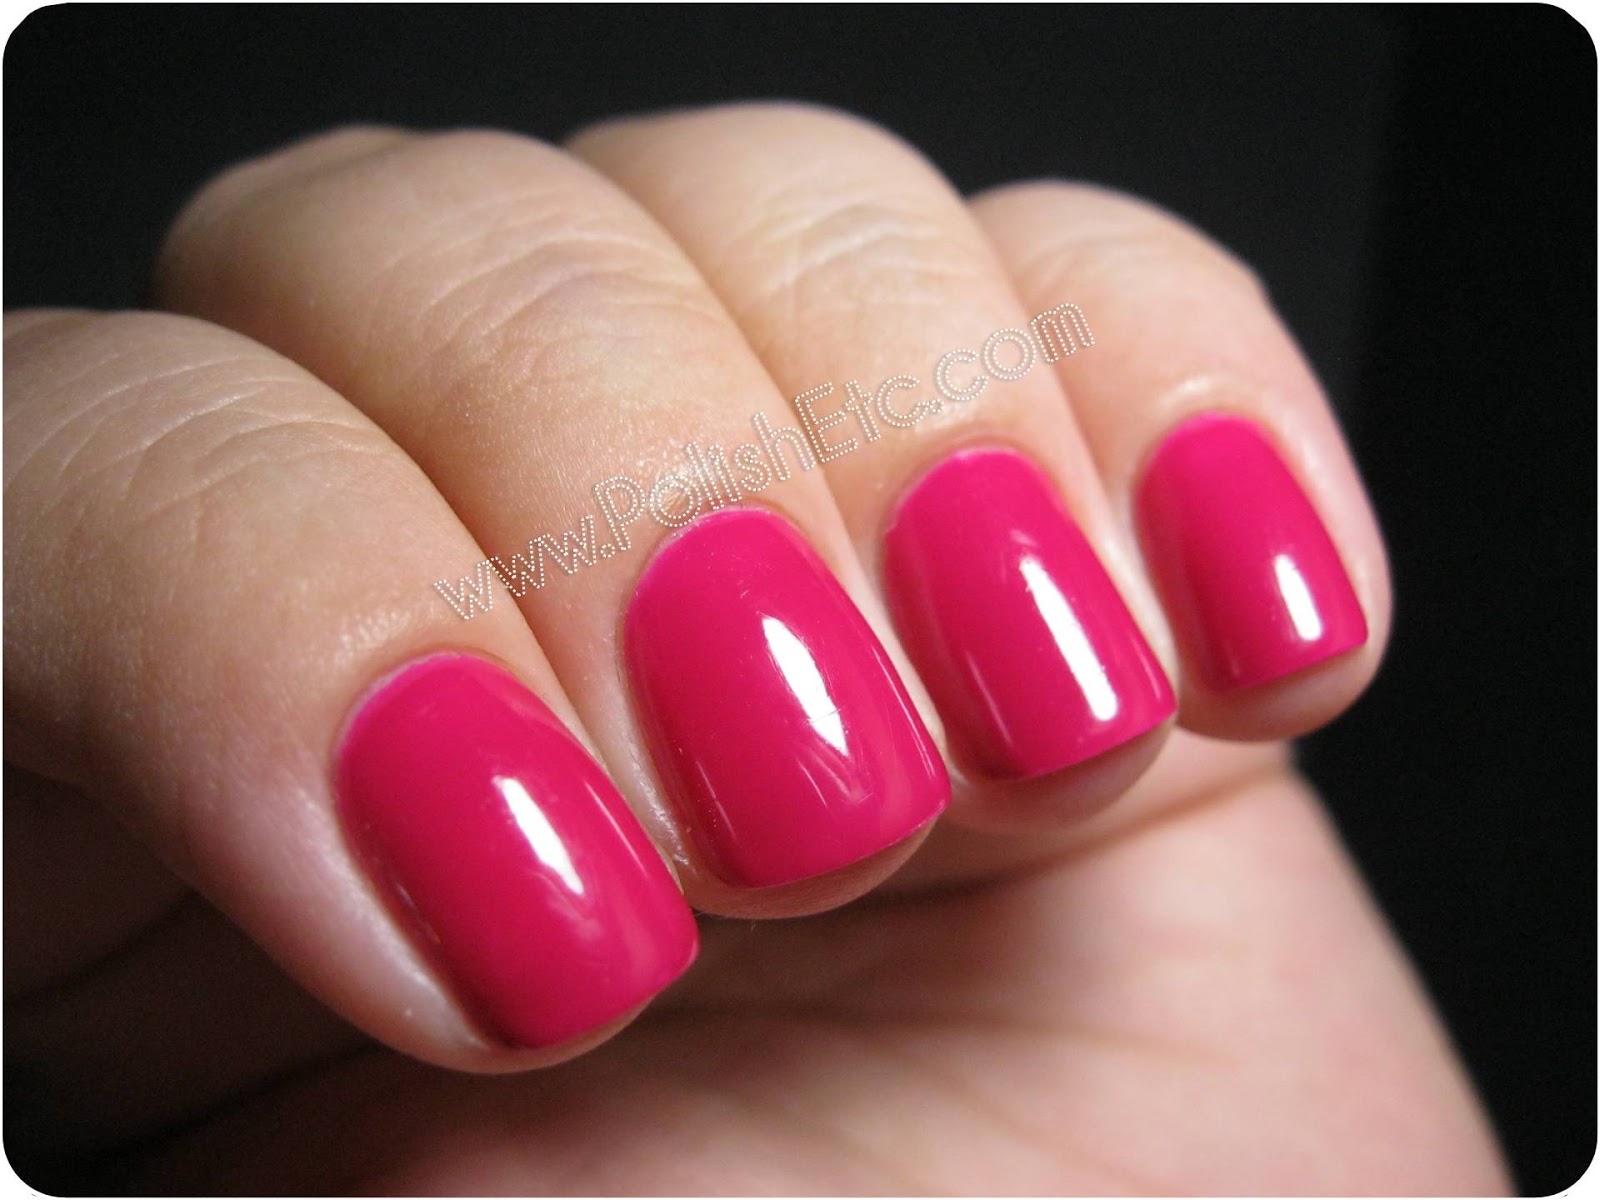 7. Orly Nail Lacquer in "Purple Crush" - wide 1